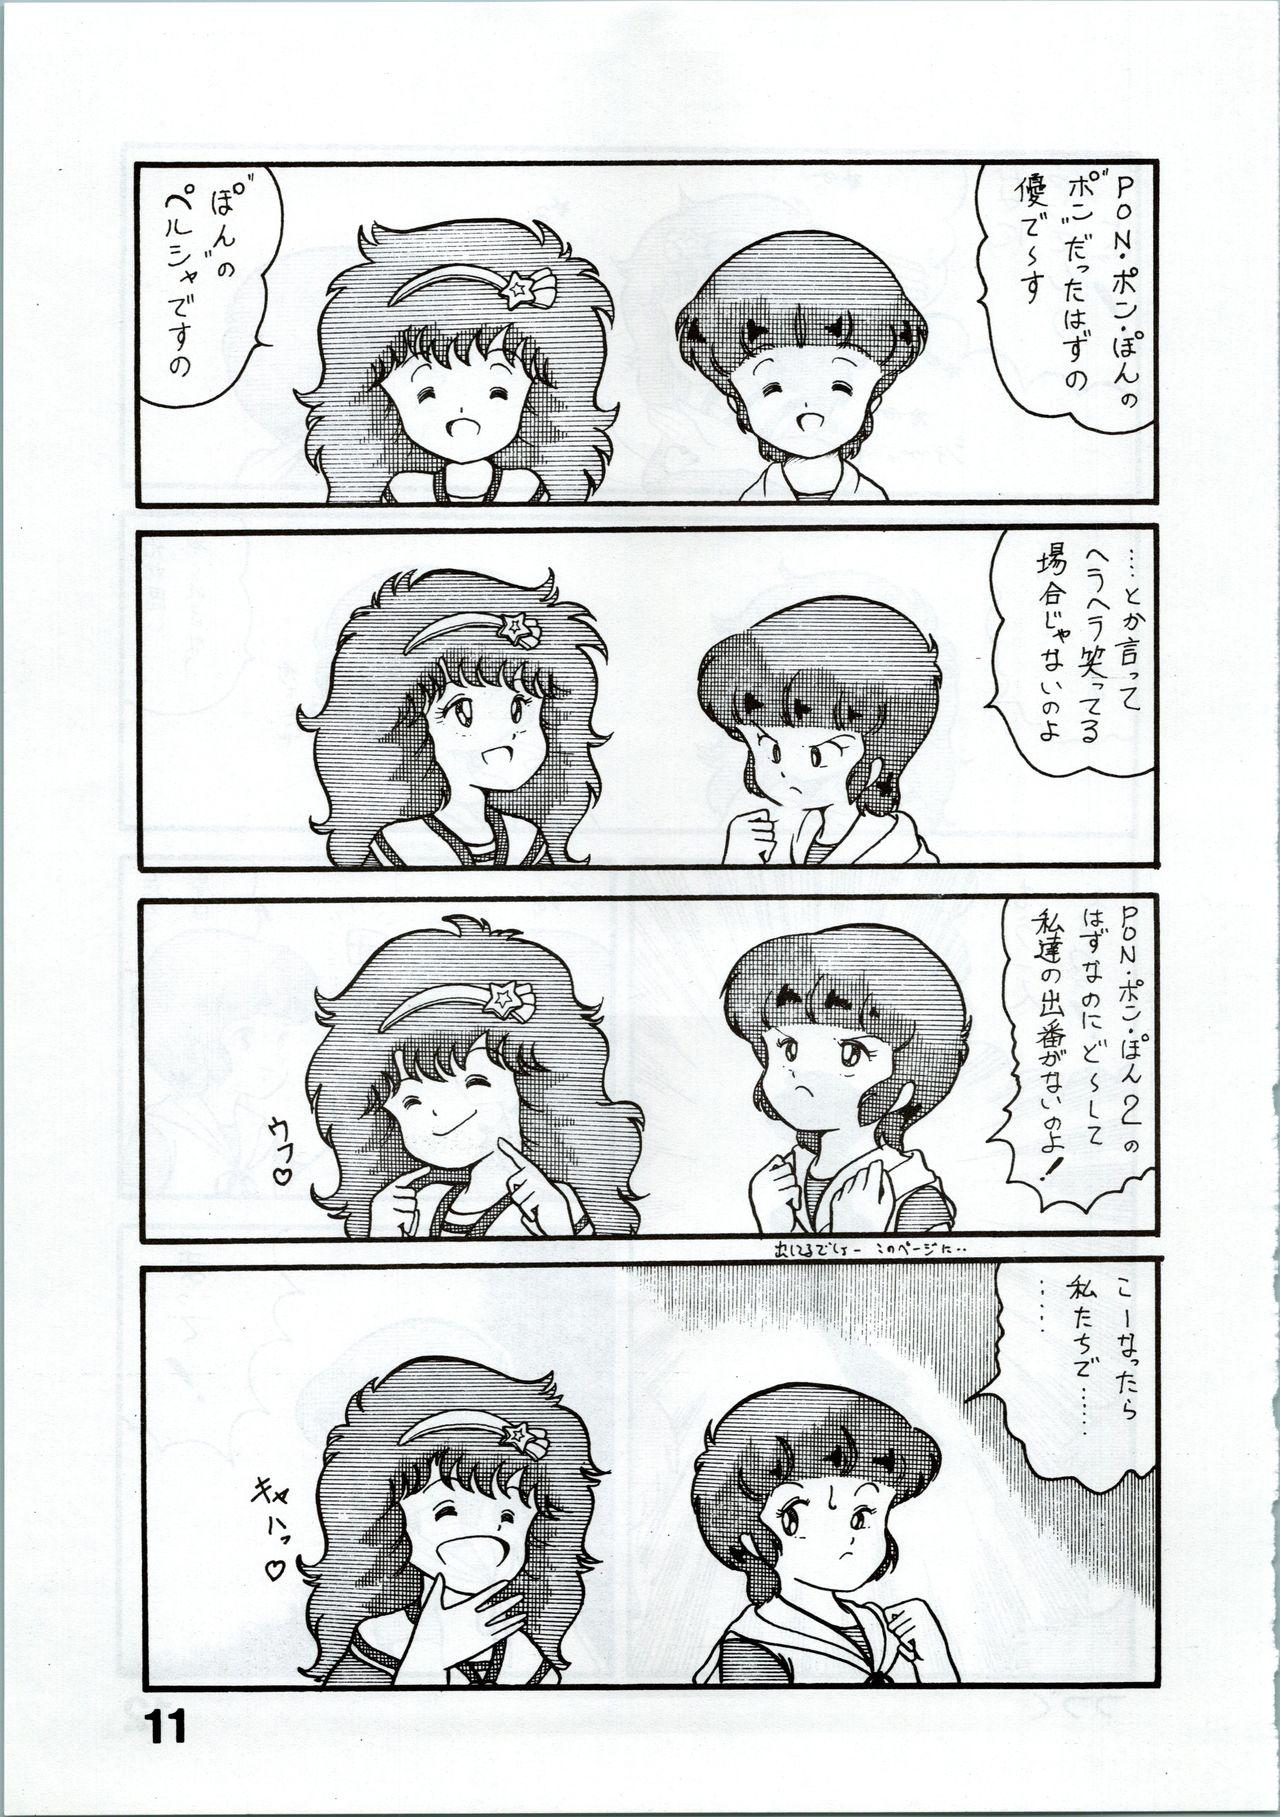 Gordita Magical Ponponpon 2 - Magical emi Russian - Page 11